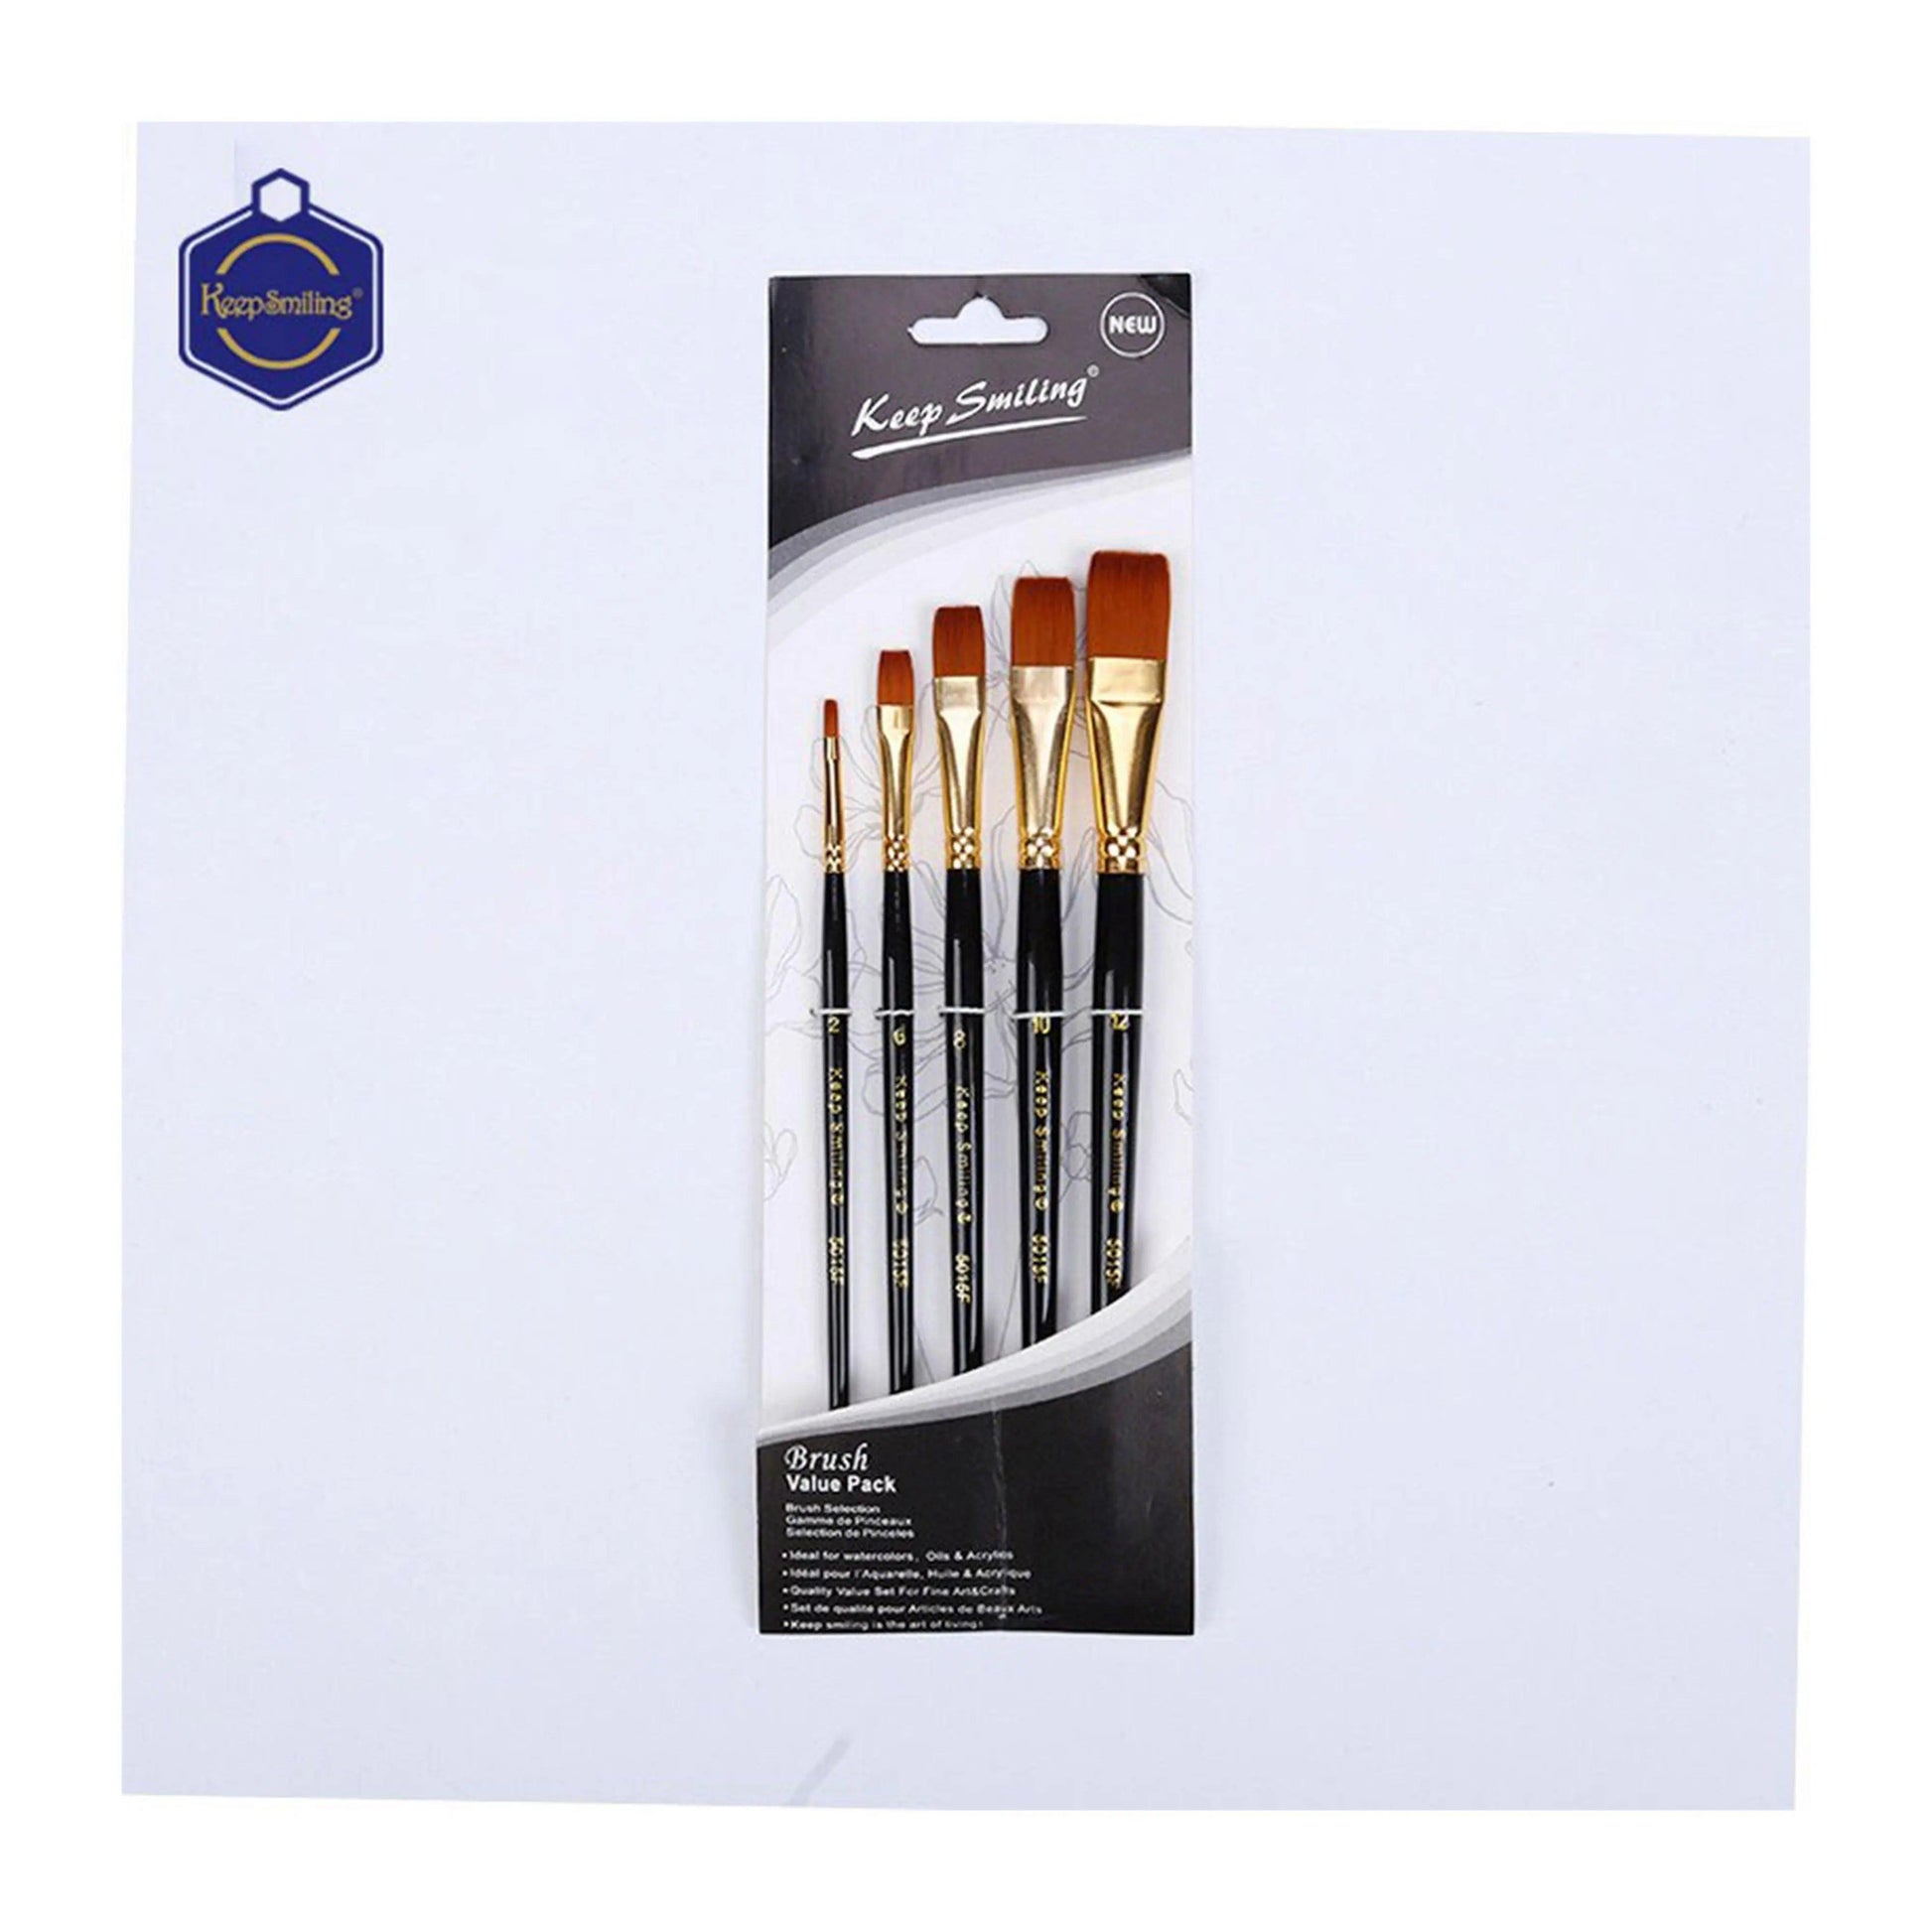 Keep Smiling Brushes Value Pack Of 5 The Stationers